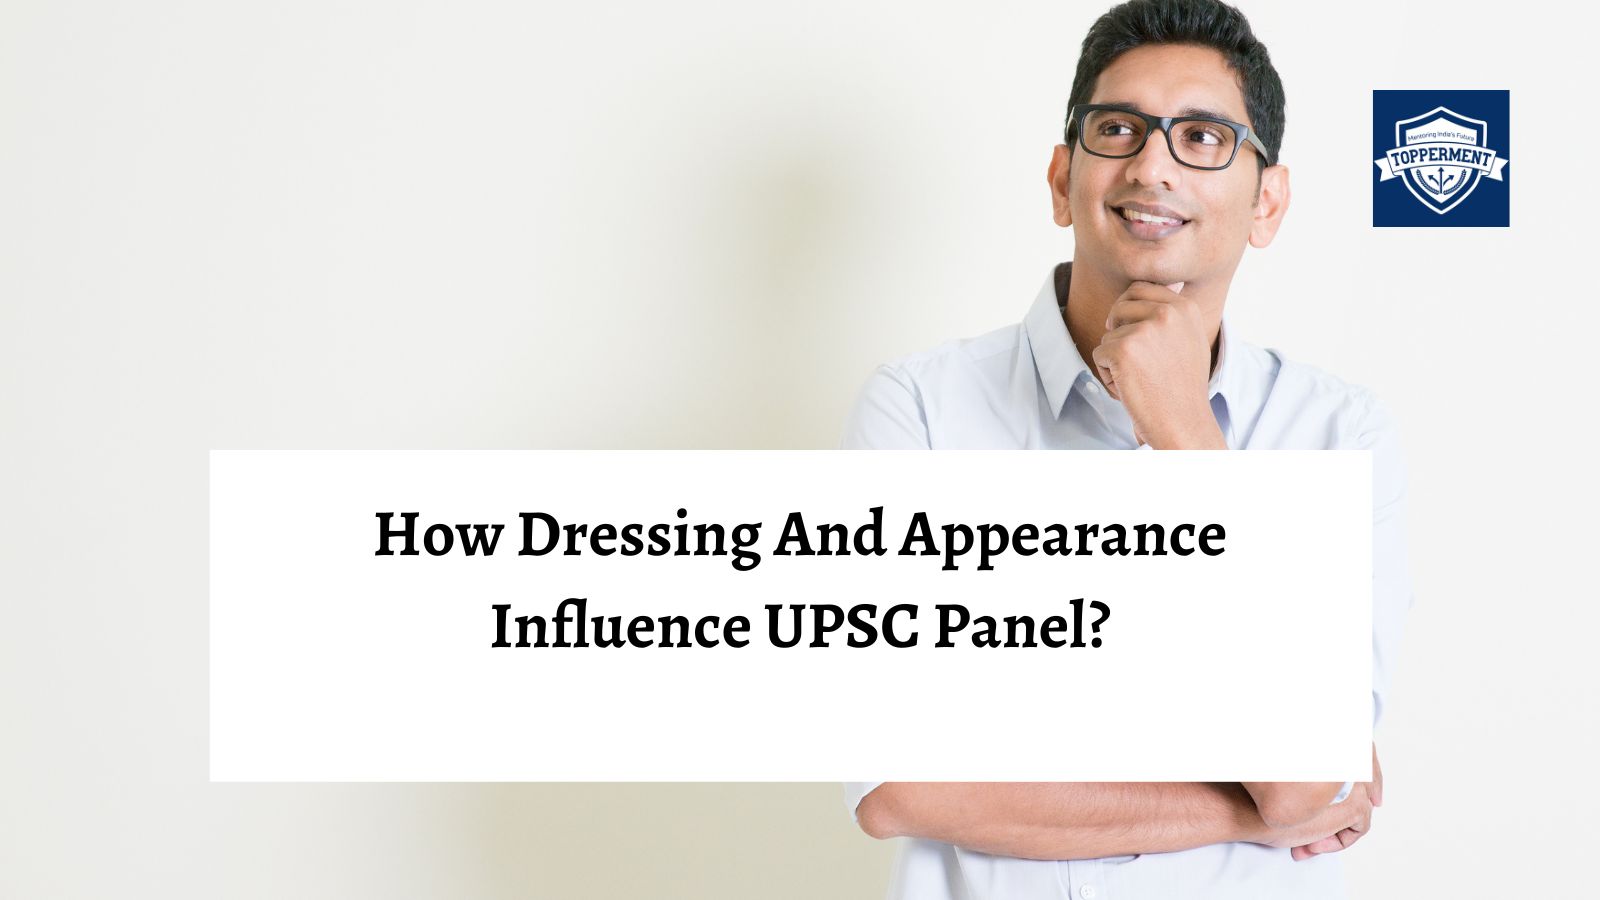 How dressing and appearance influence UPSC Panel? | Best UPSC IAS Coaching For Mentorship And Guidance